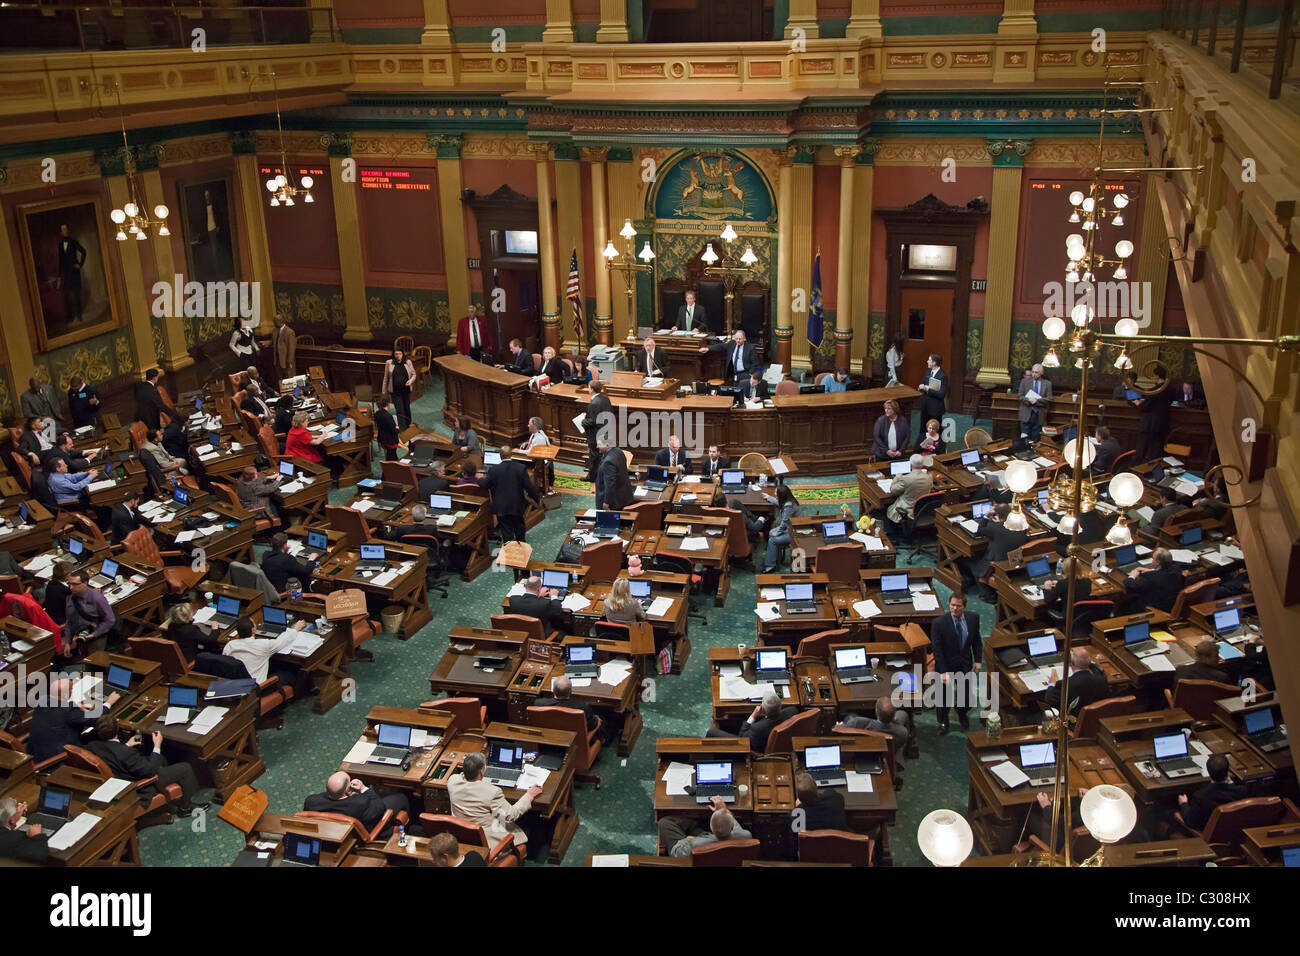 Lansing, Michigan - The Michigan House of Representatives in session. Stock Photo